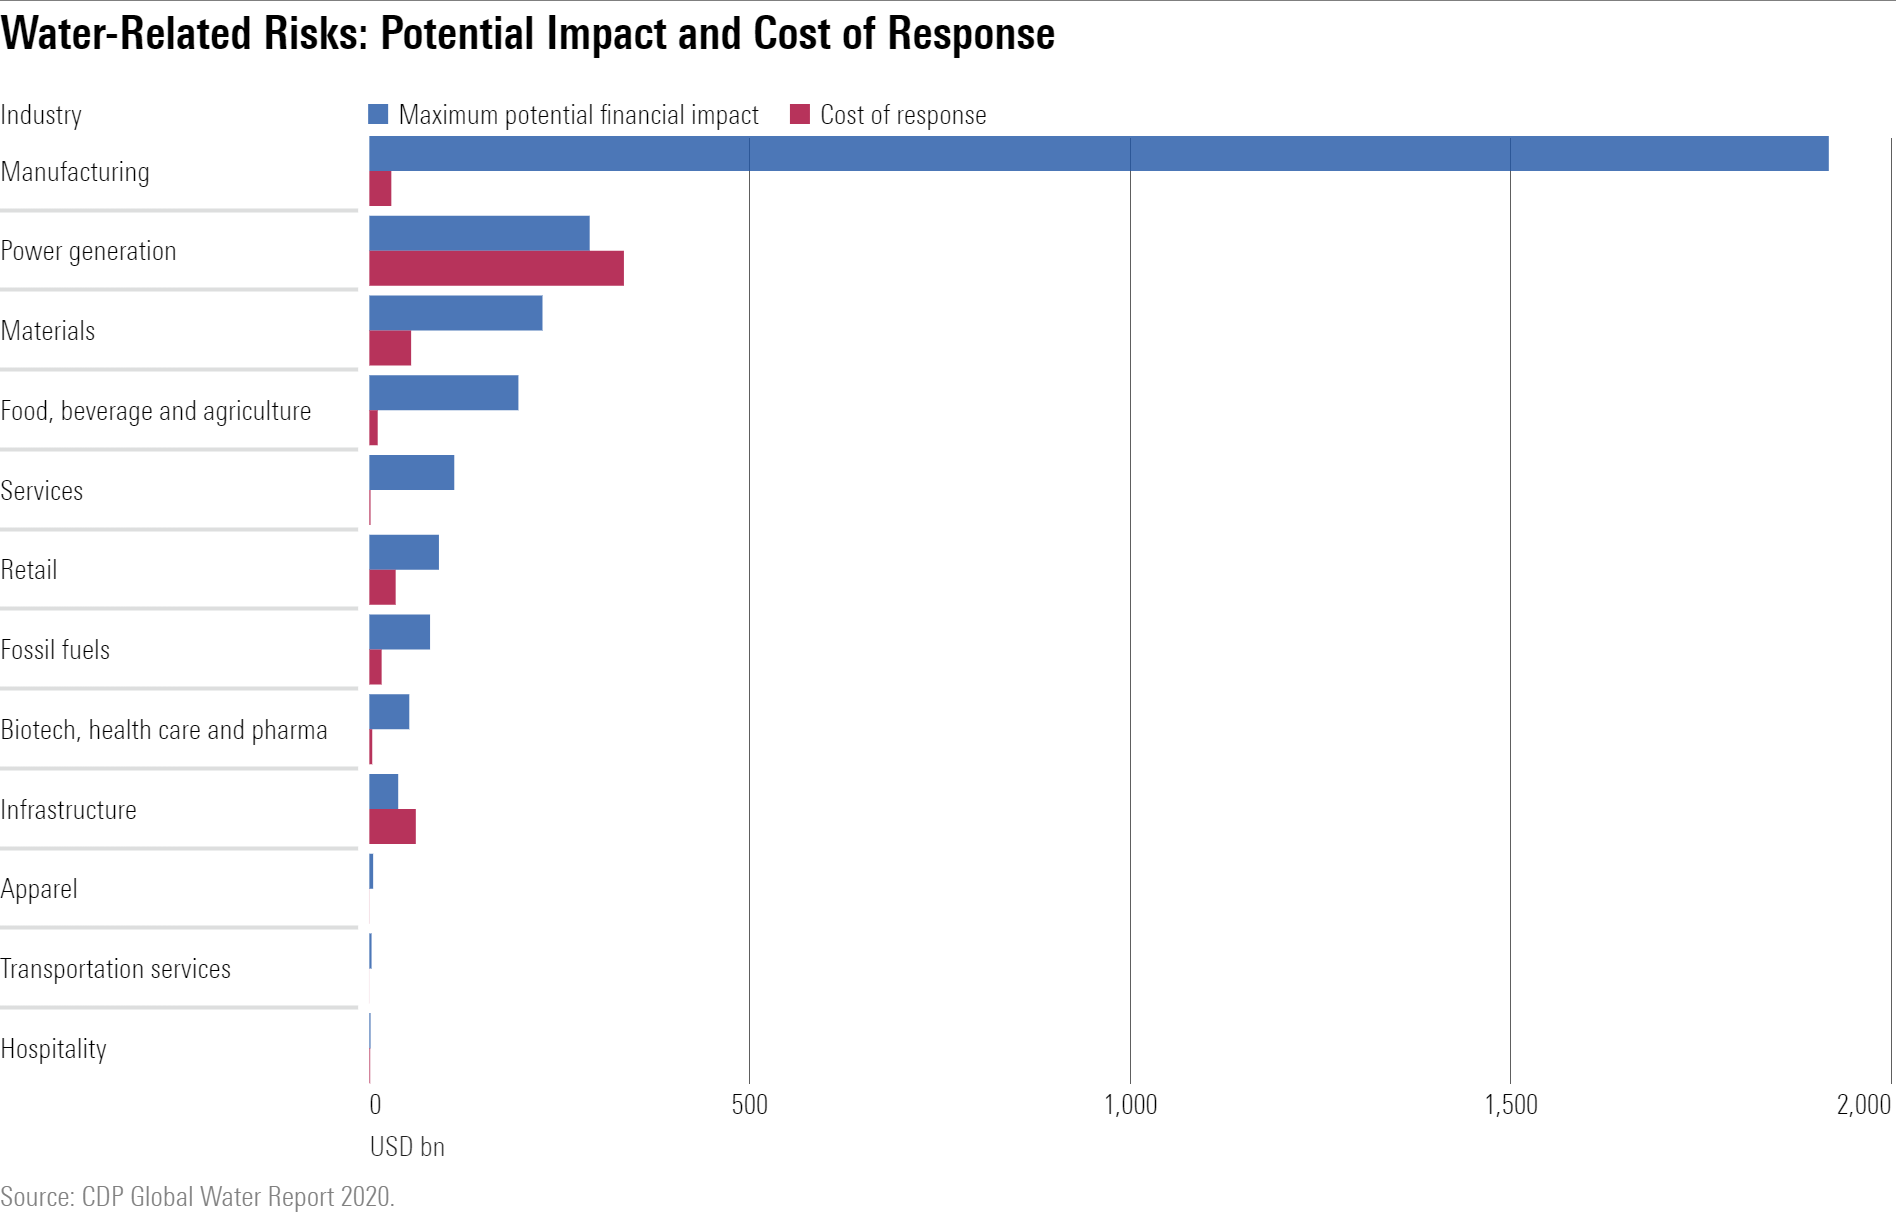 Horizontal bar chart showing that several sectors are exposed to potential financial impacts from water-related risks that exceed the cost of mitigation.